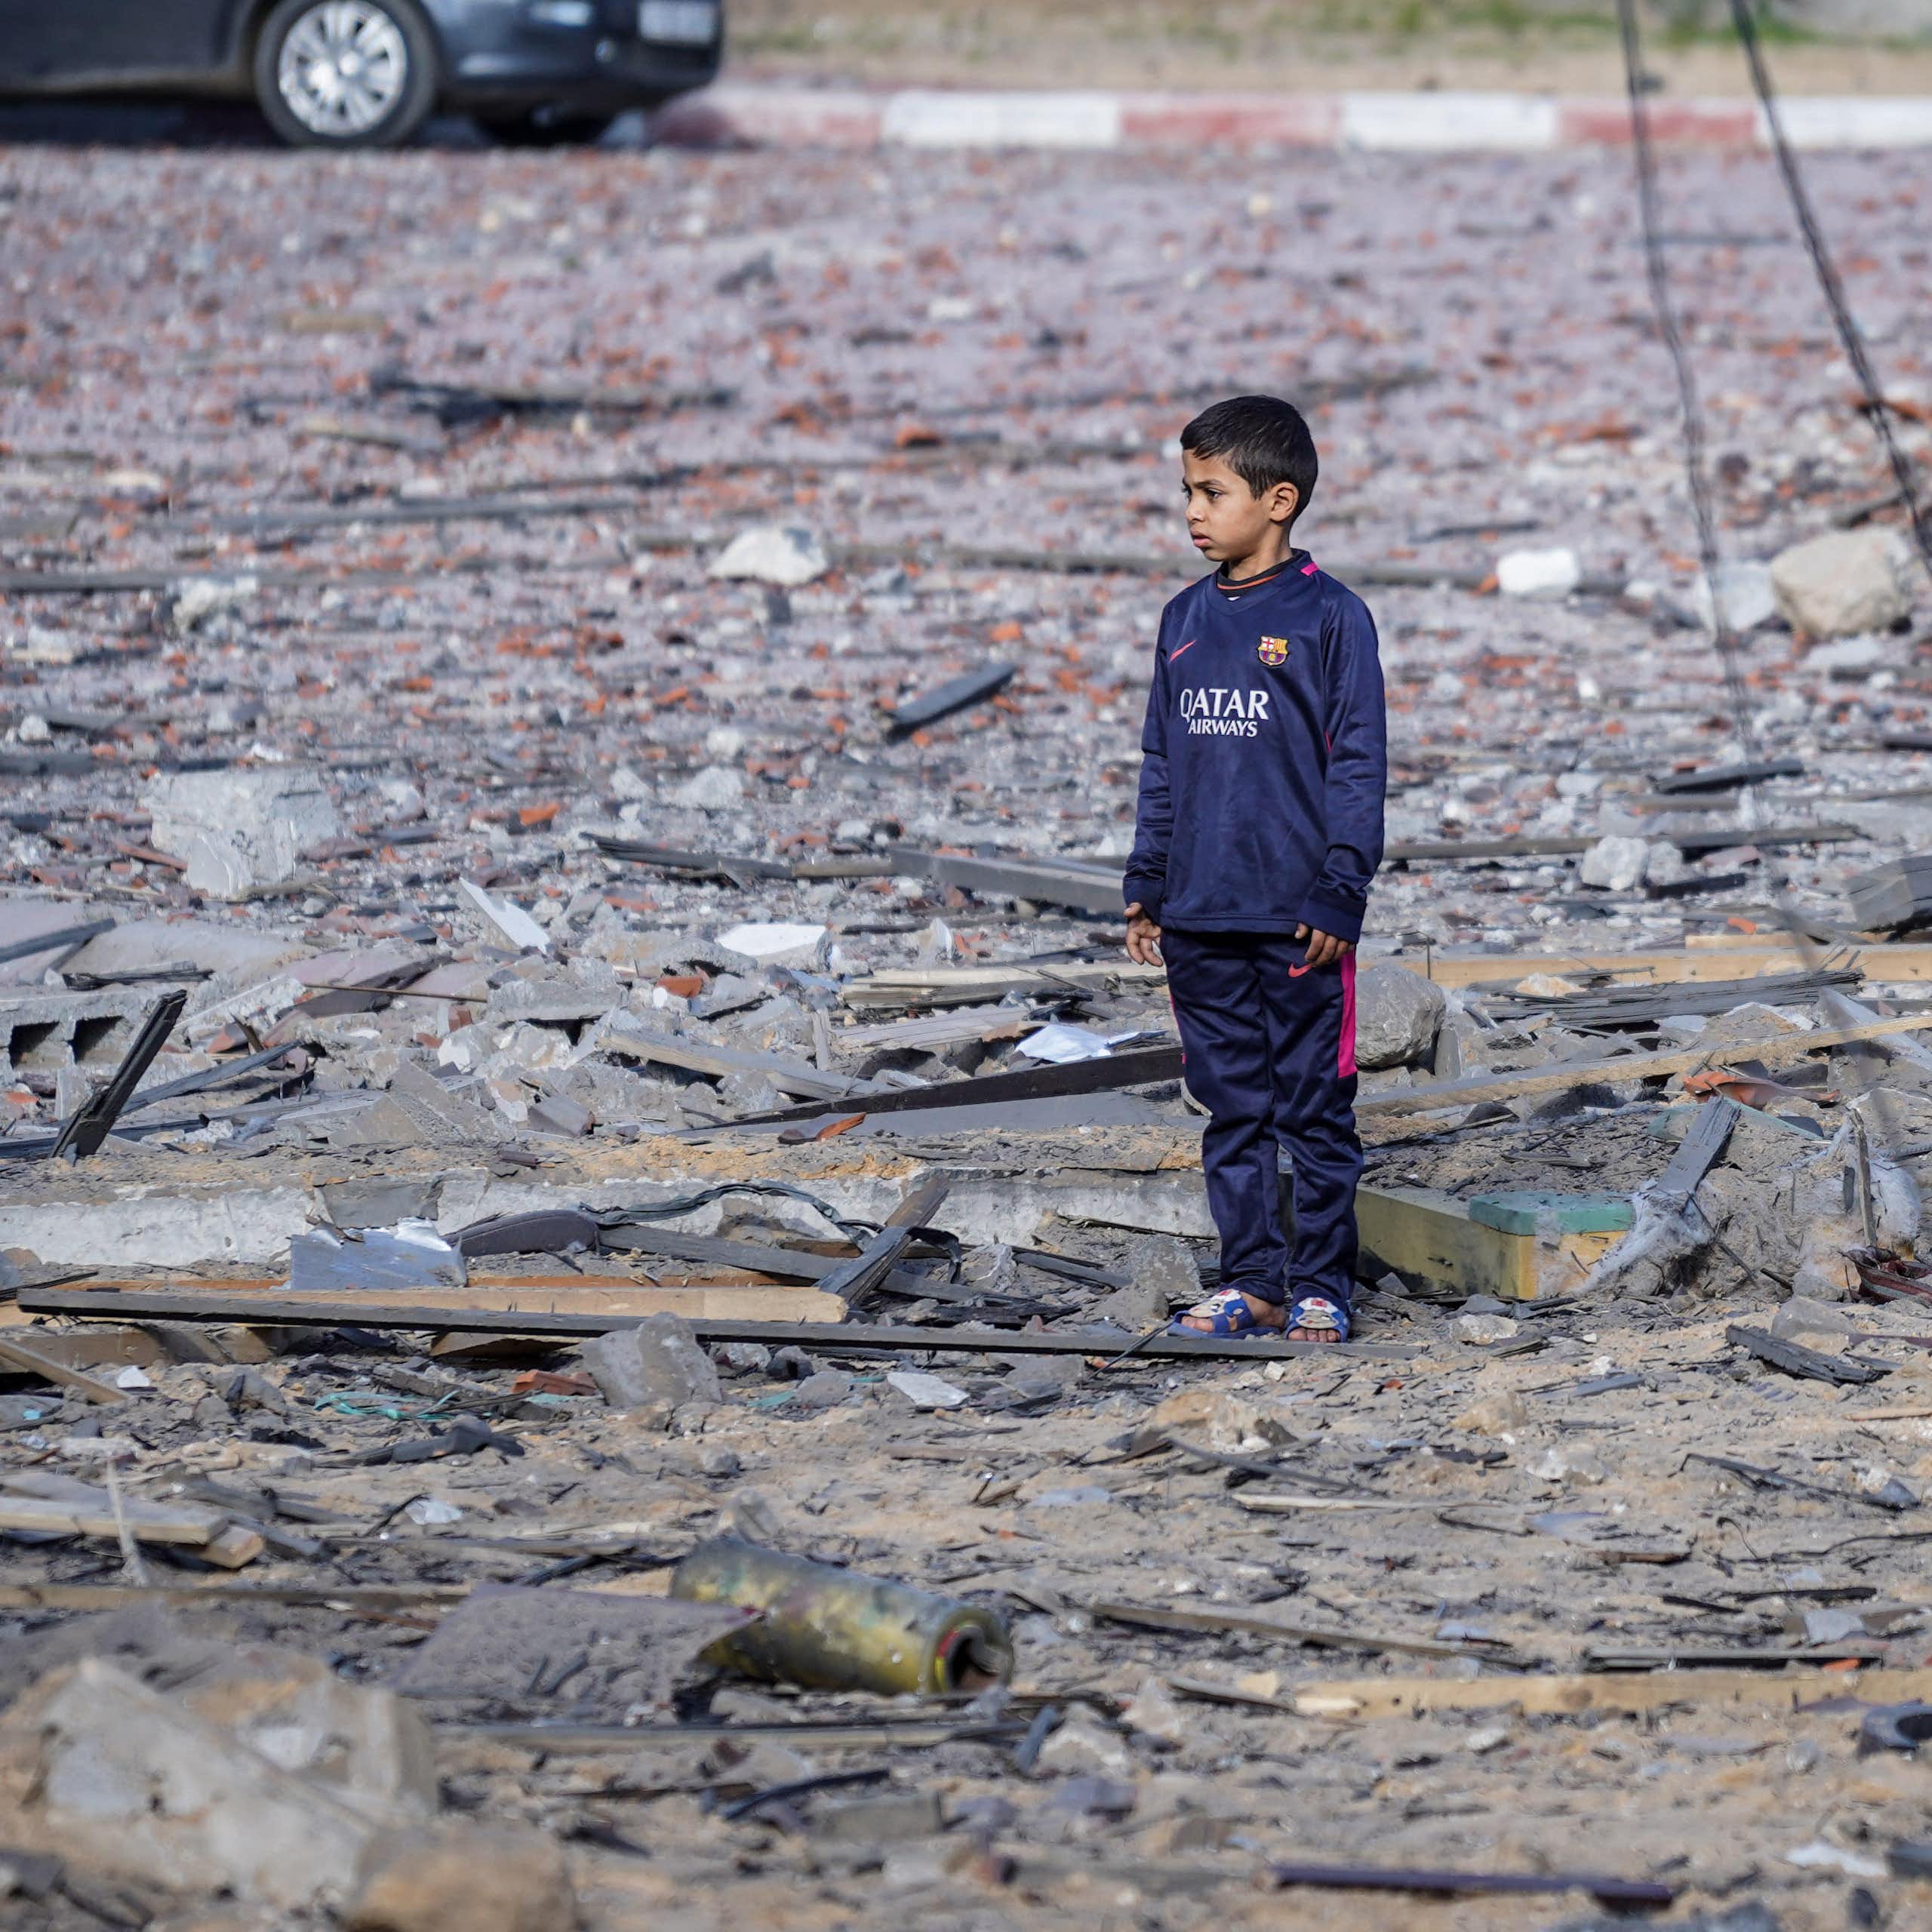 A child standing alone surrounded by rubbleA child seen standing alone surrounded by rubble.